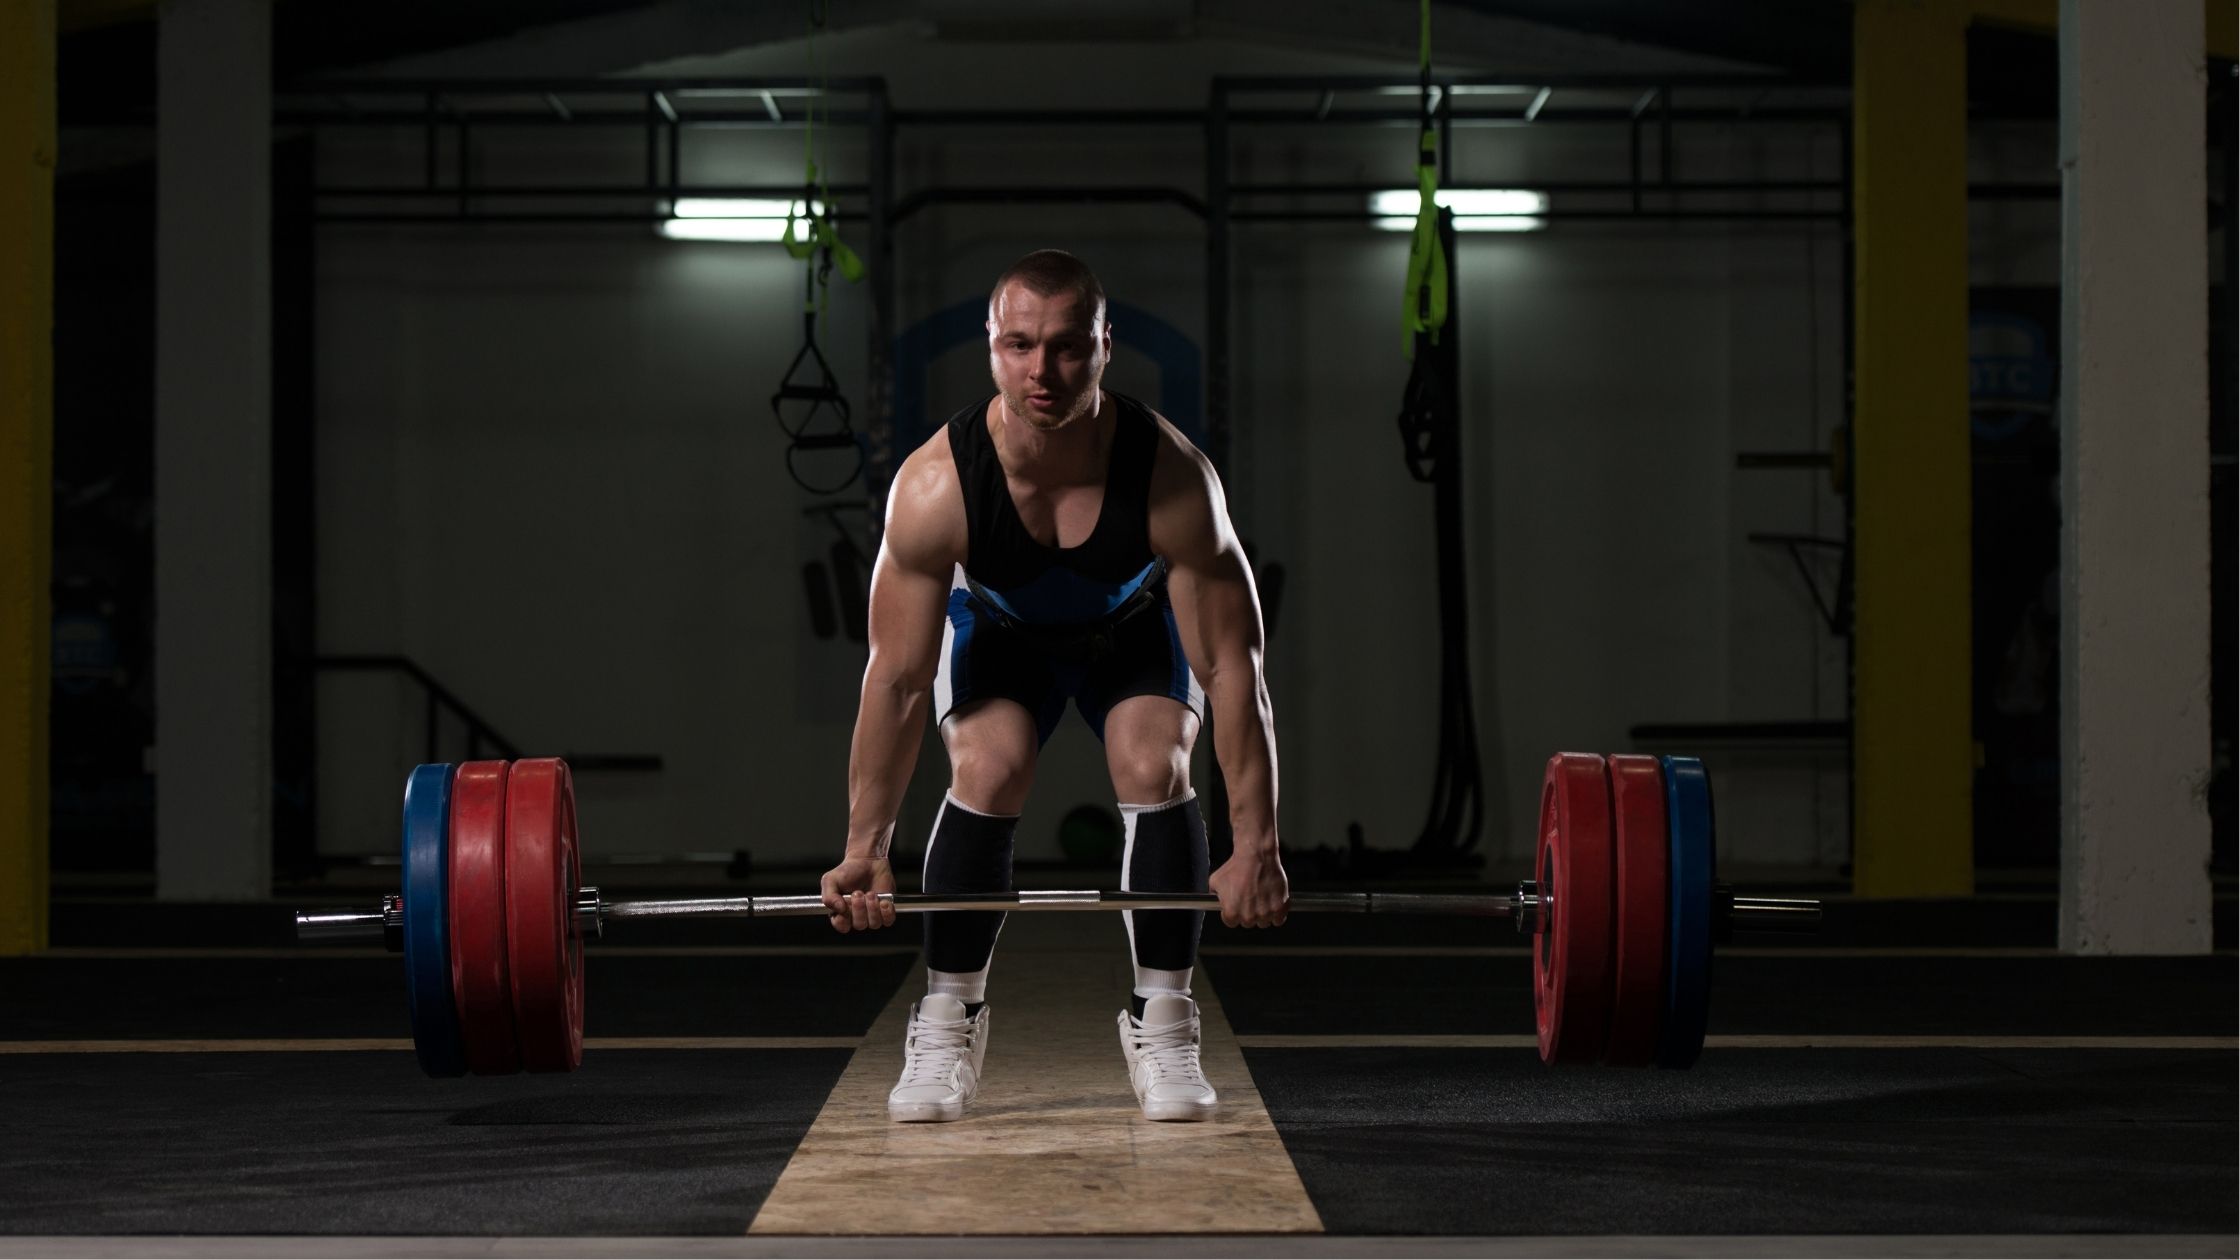 types of Barbells: powerlifting barbell